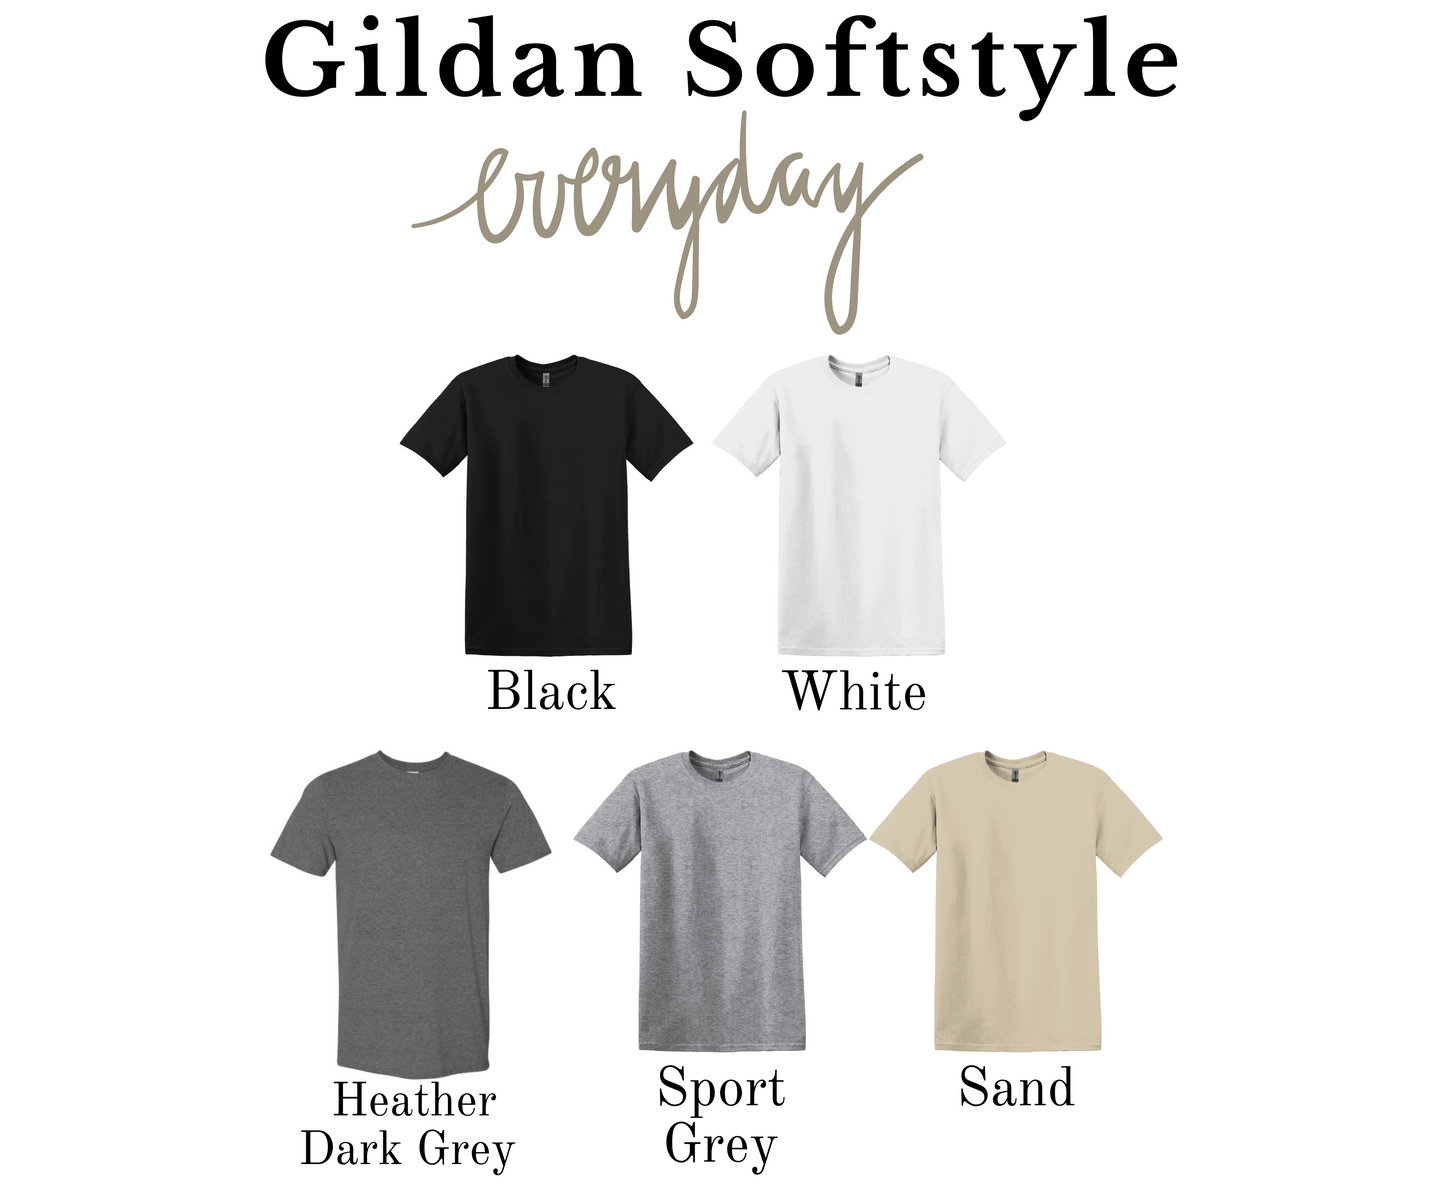 Behind Every Football Player is a Mom Personalized Gildan Softstyle Sweatshirt or T-shirt